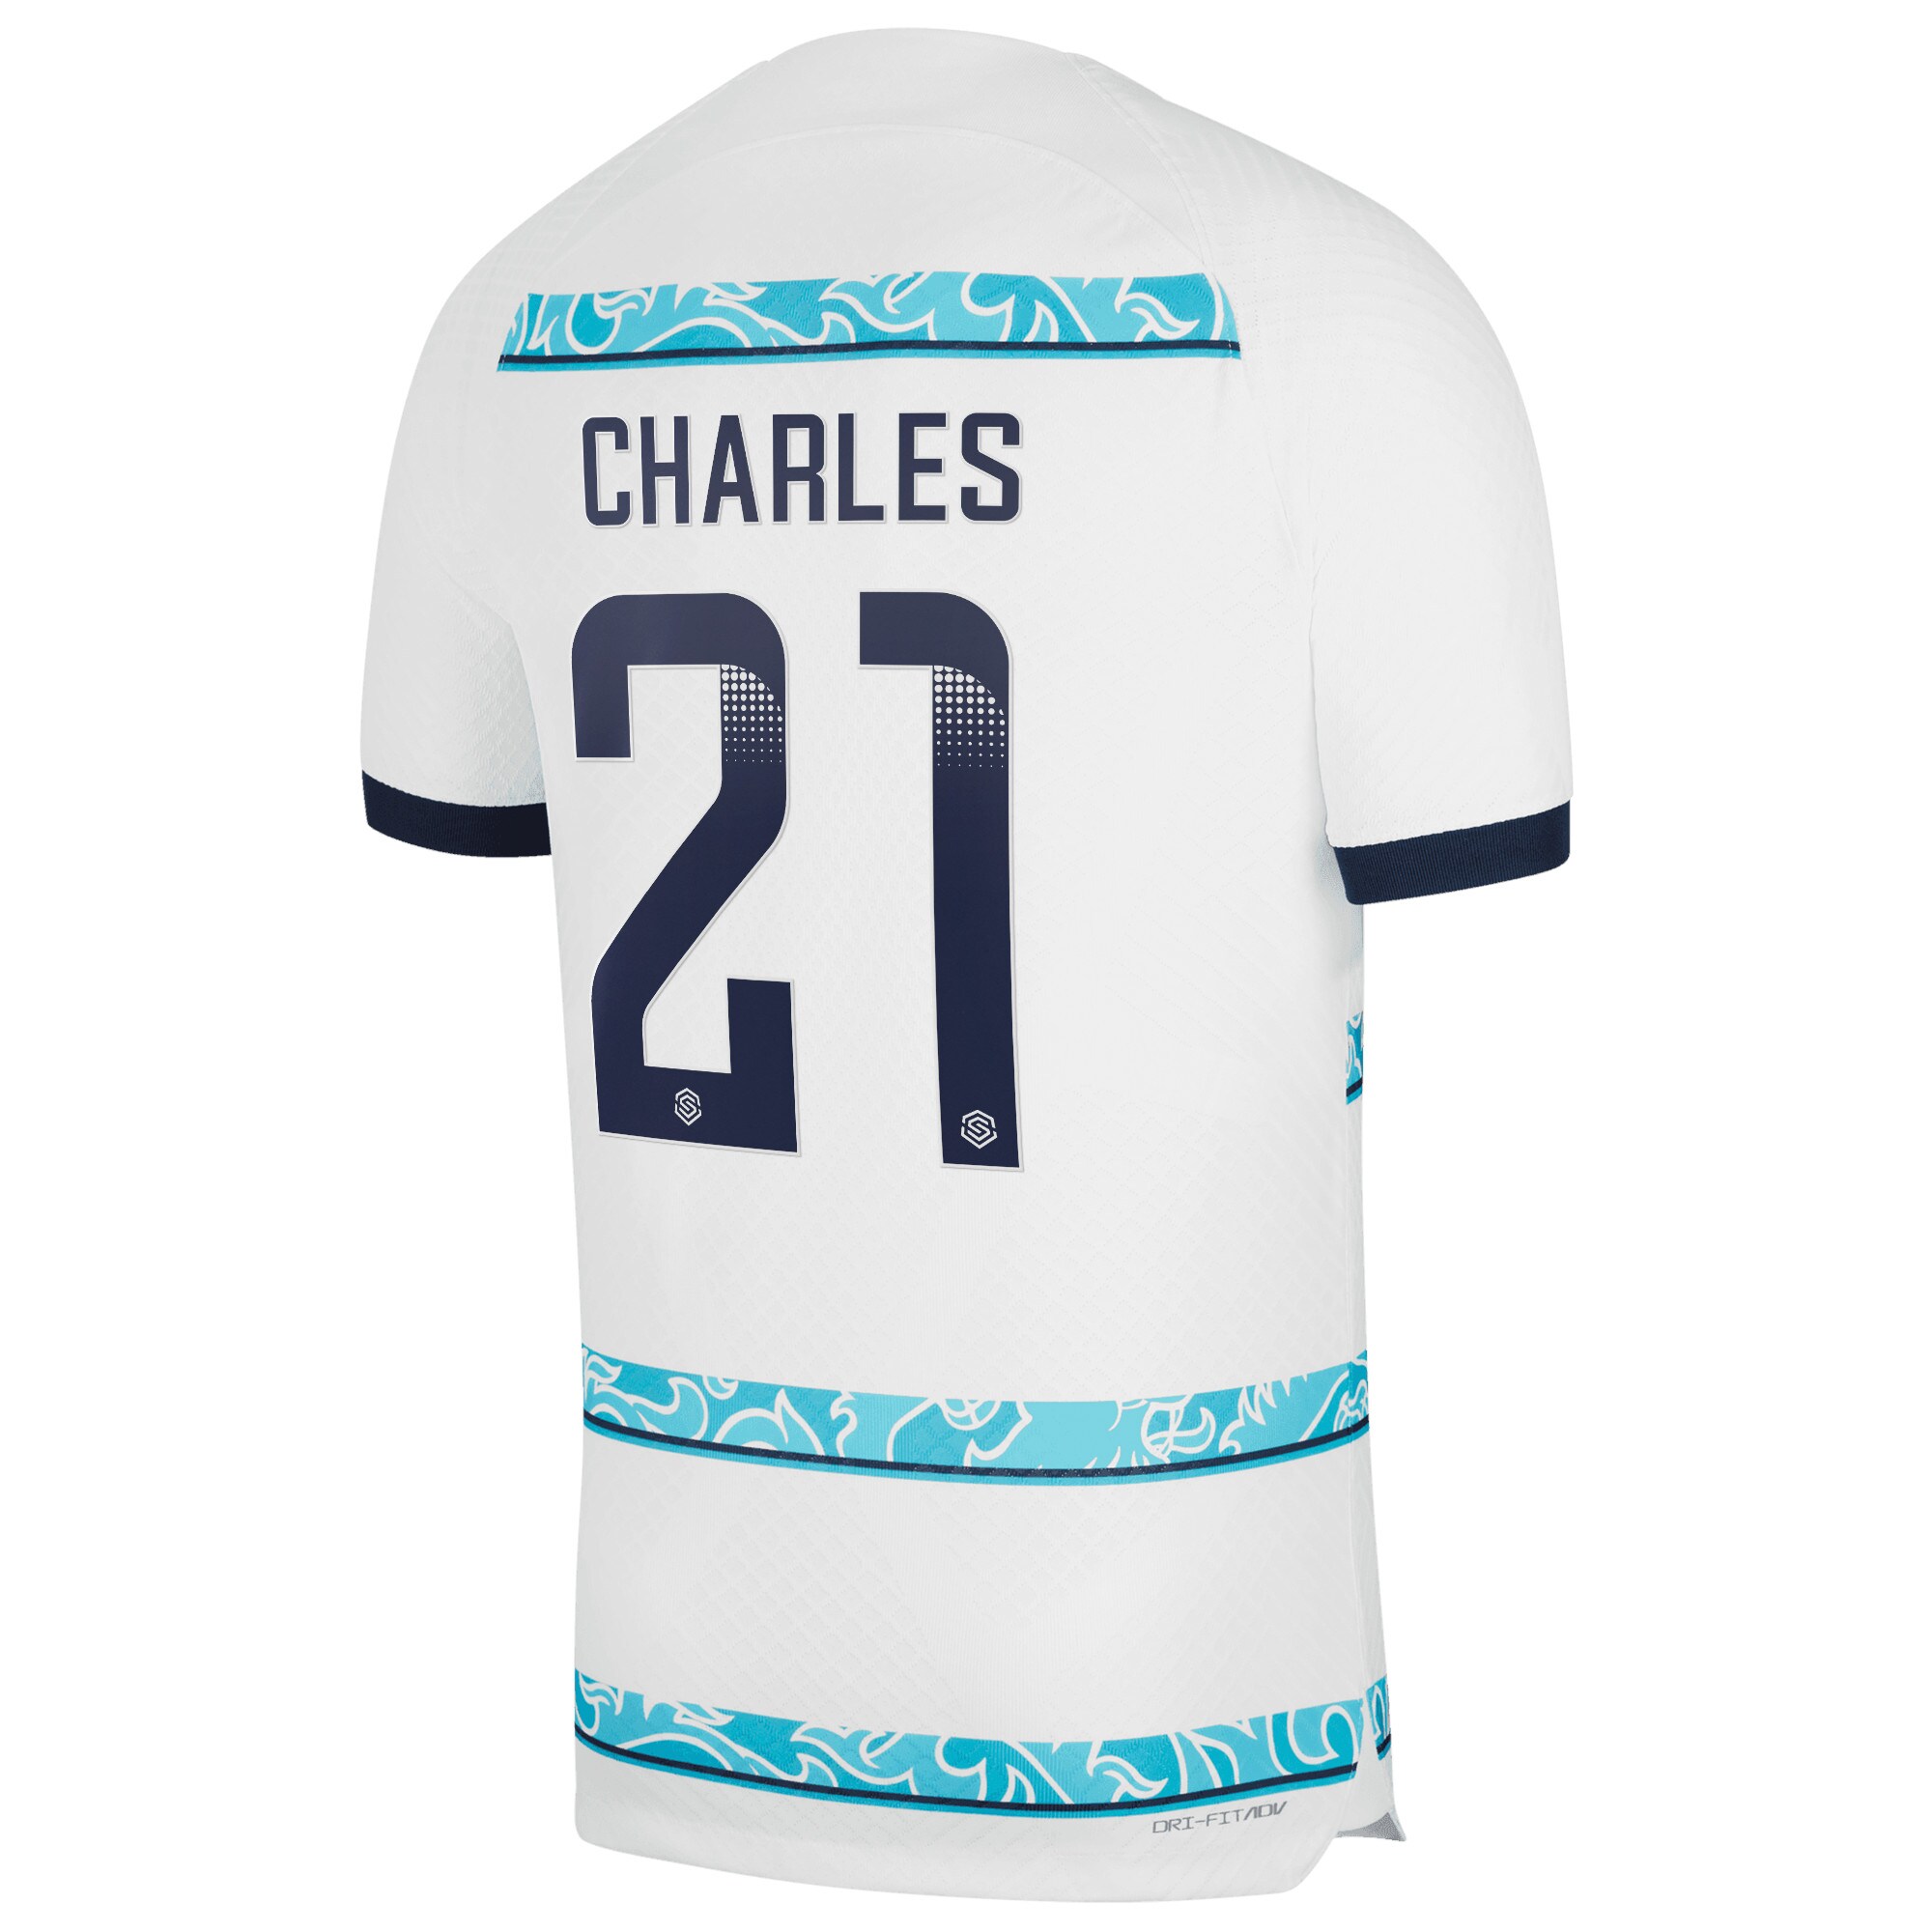 Chelsea WSL Away Vapor Match Shirt 2022-23 with Charles 21 printing